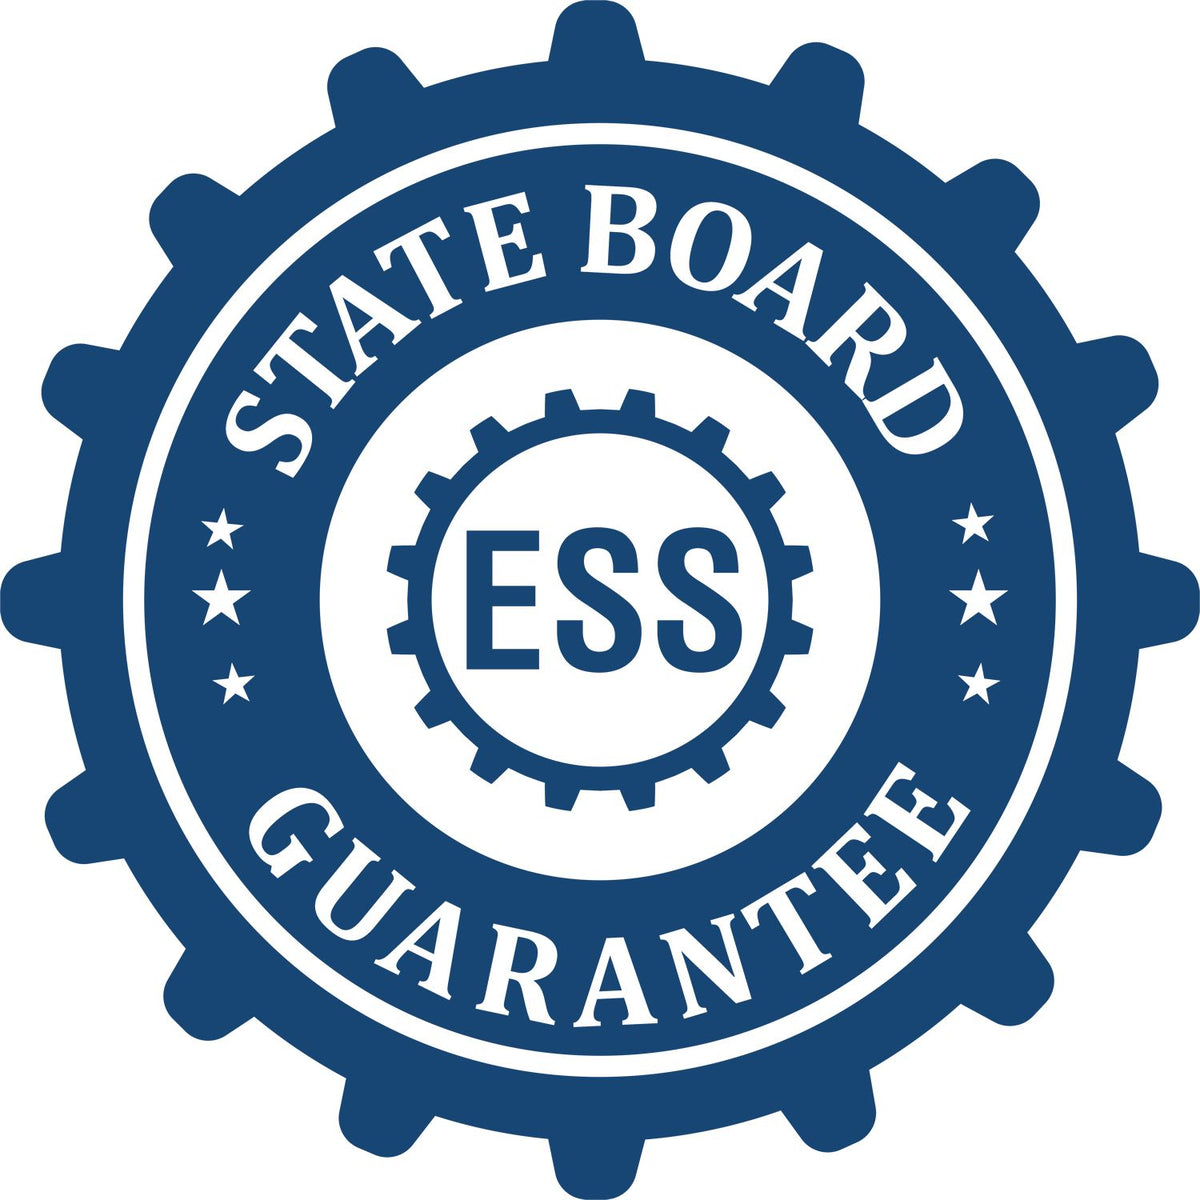 An emblem in a gear shape illustrating a state board guarantee for the Gift Texas Geologist Seal